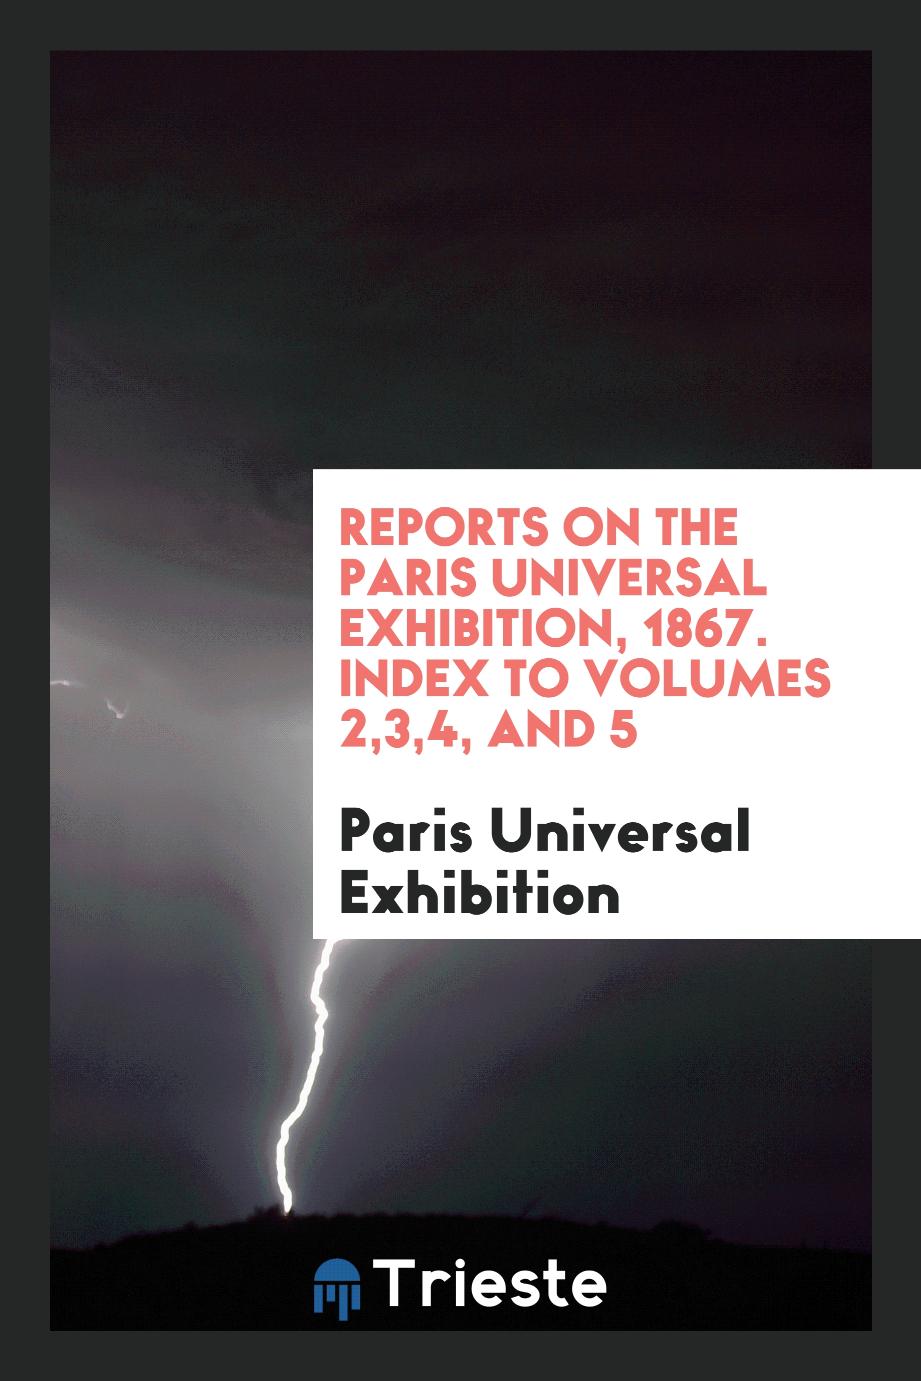 Paris Universal Exhibition - Reports on the Paris Universal Exhibition, 1867. Index to Volumes 2,3,4, and 5